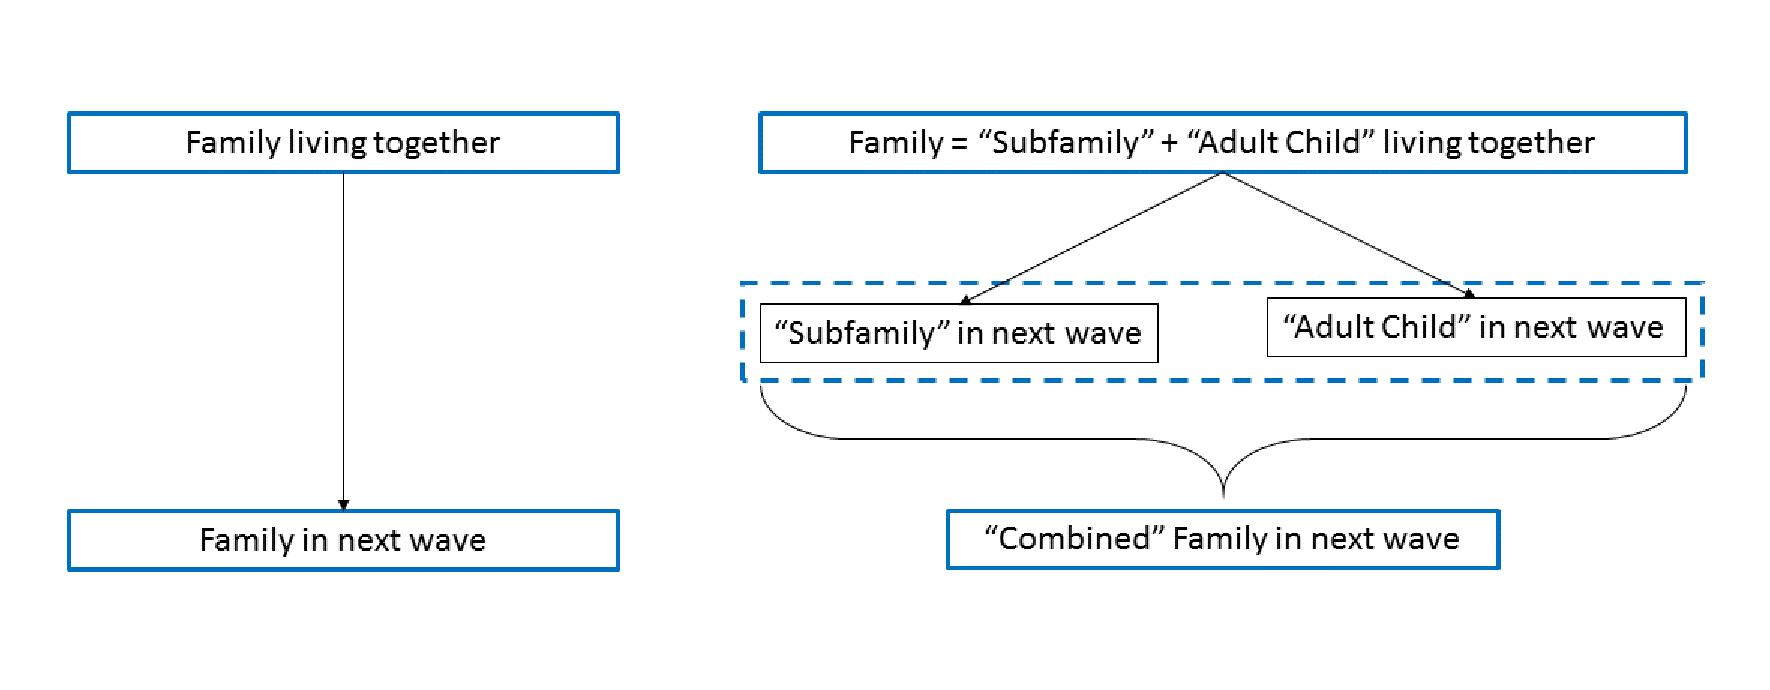 Figure 2. Combining subfamily with adult child in PSID data. See accessible link for data description.